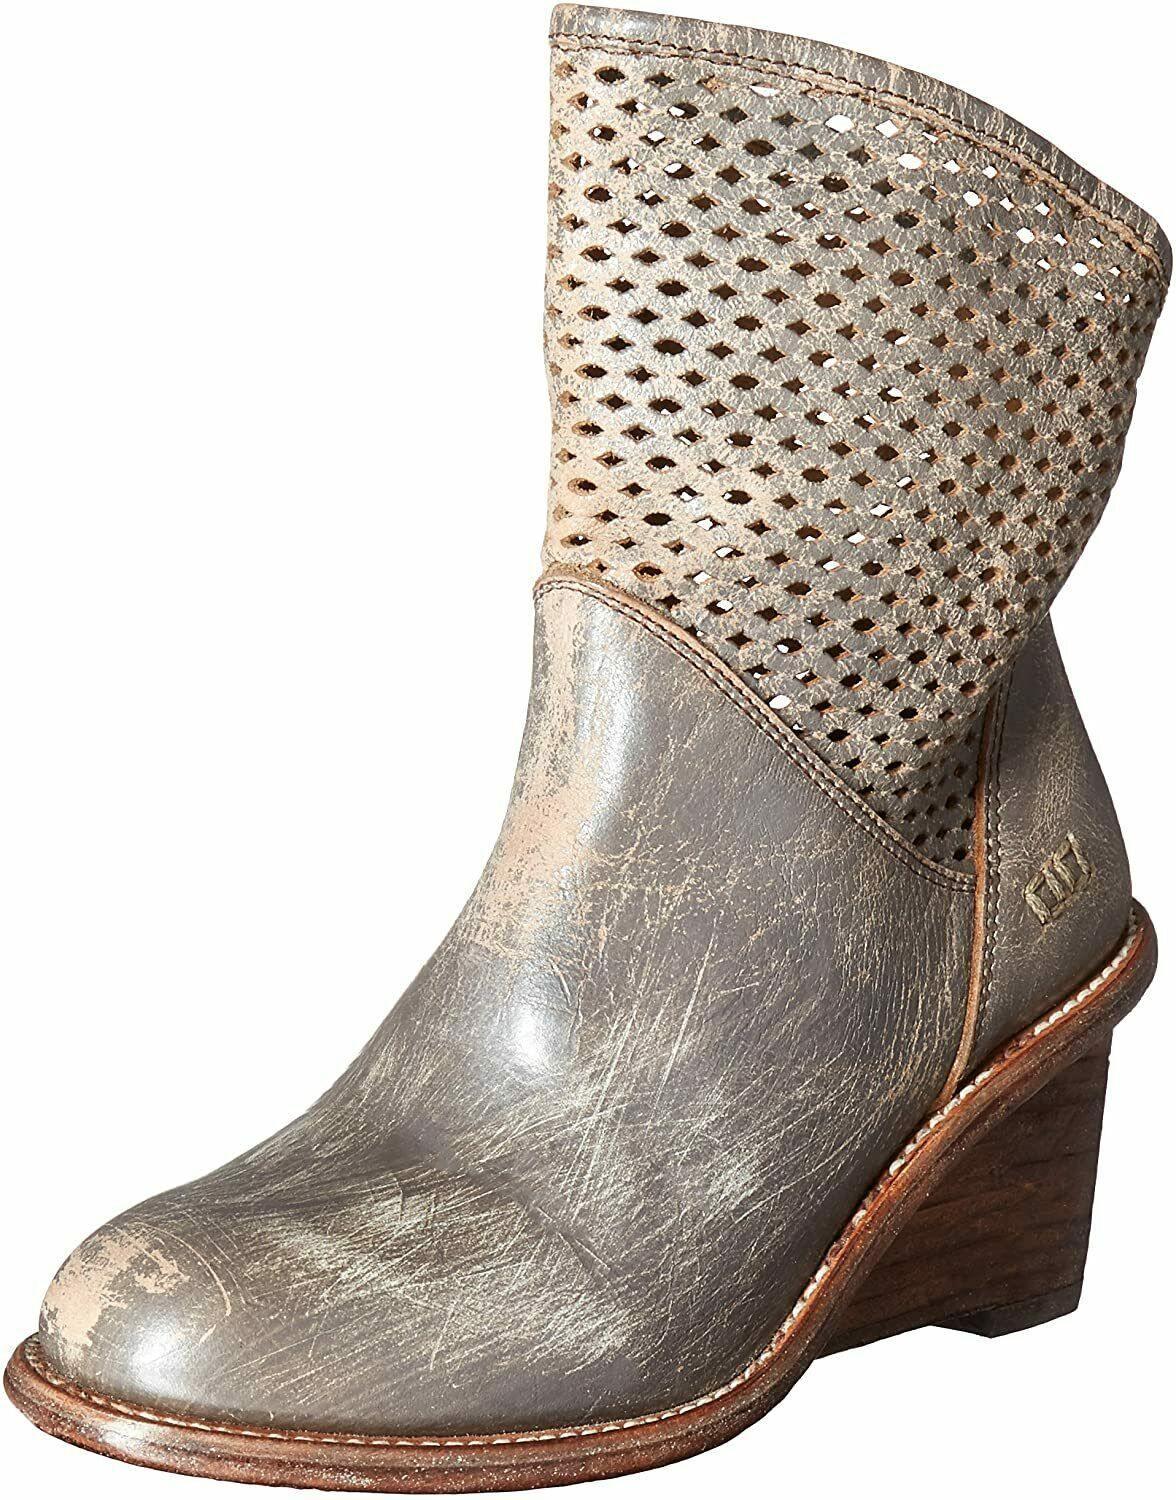 Bed Stu Duchess Smoke Grey Lux Boots Women's Distressed Booties Size US 8.5 - SVNYFancy